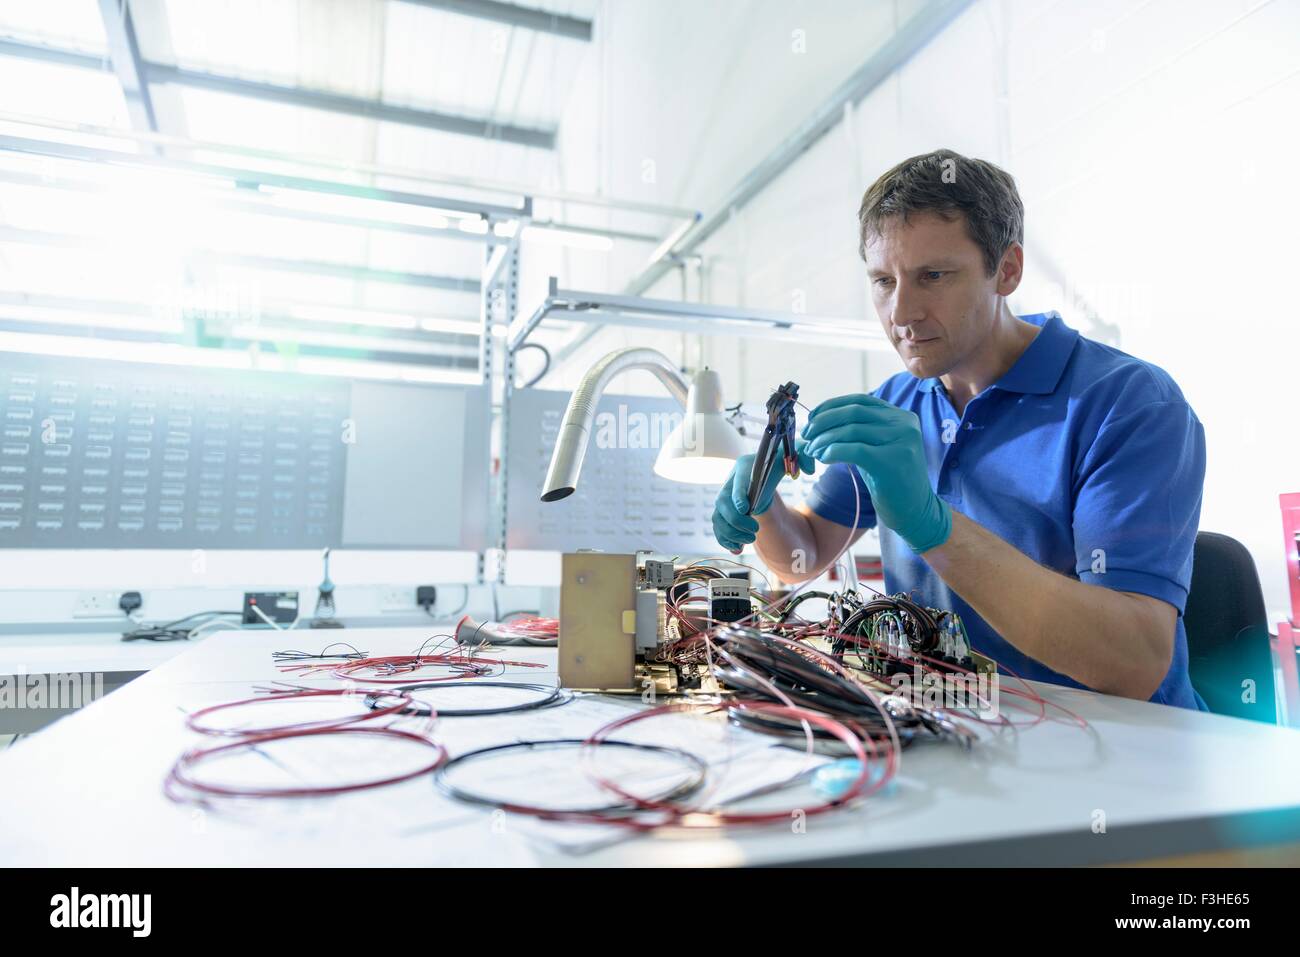 Worker assembling electronics in electronics factory Stock Photo